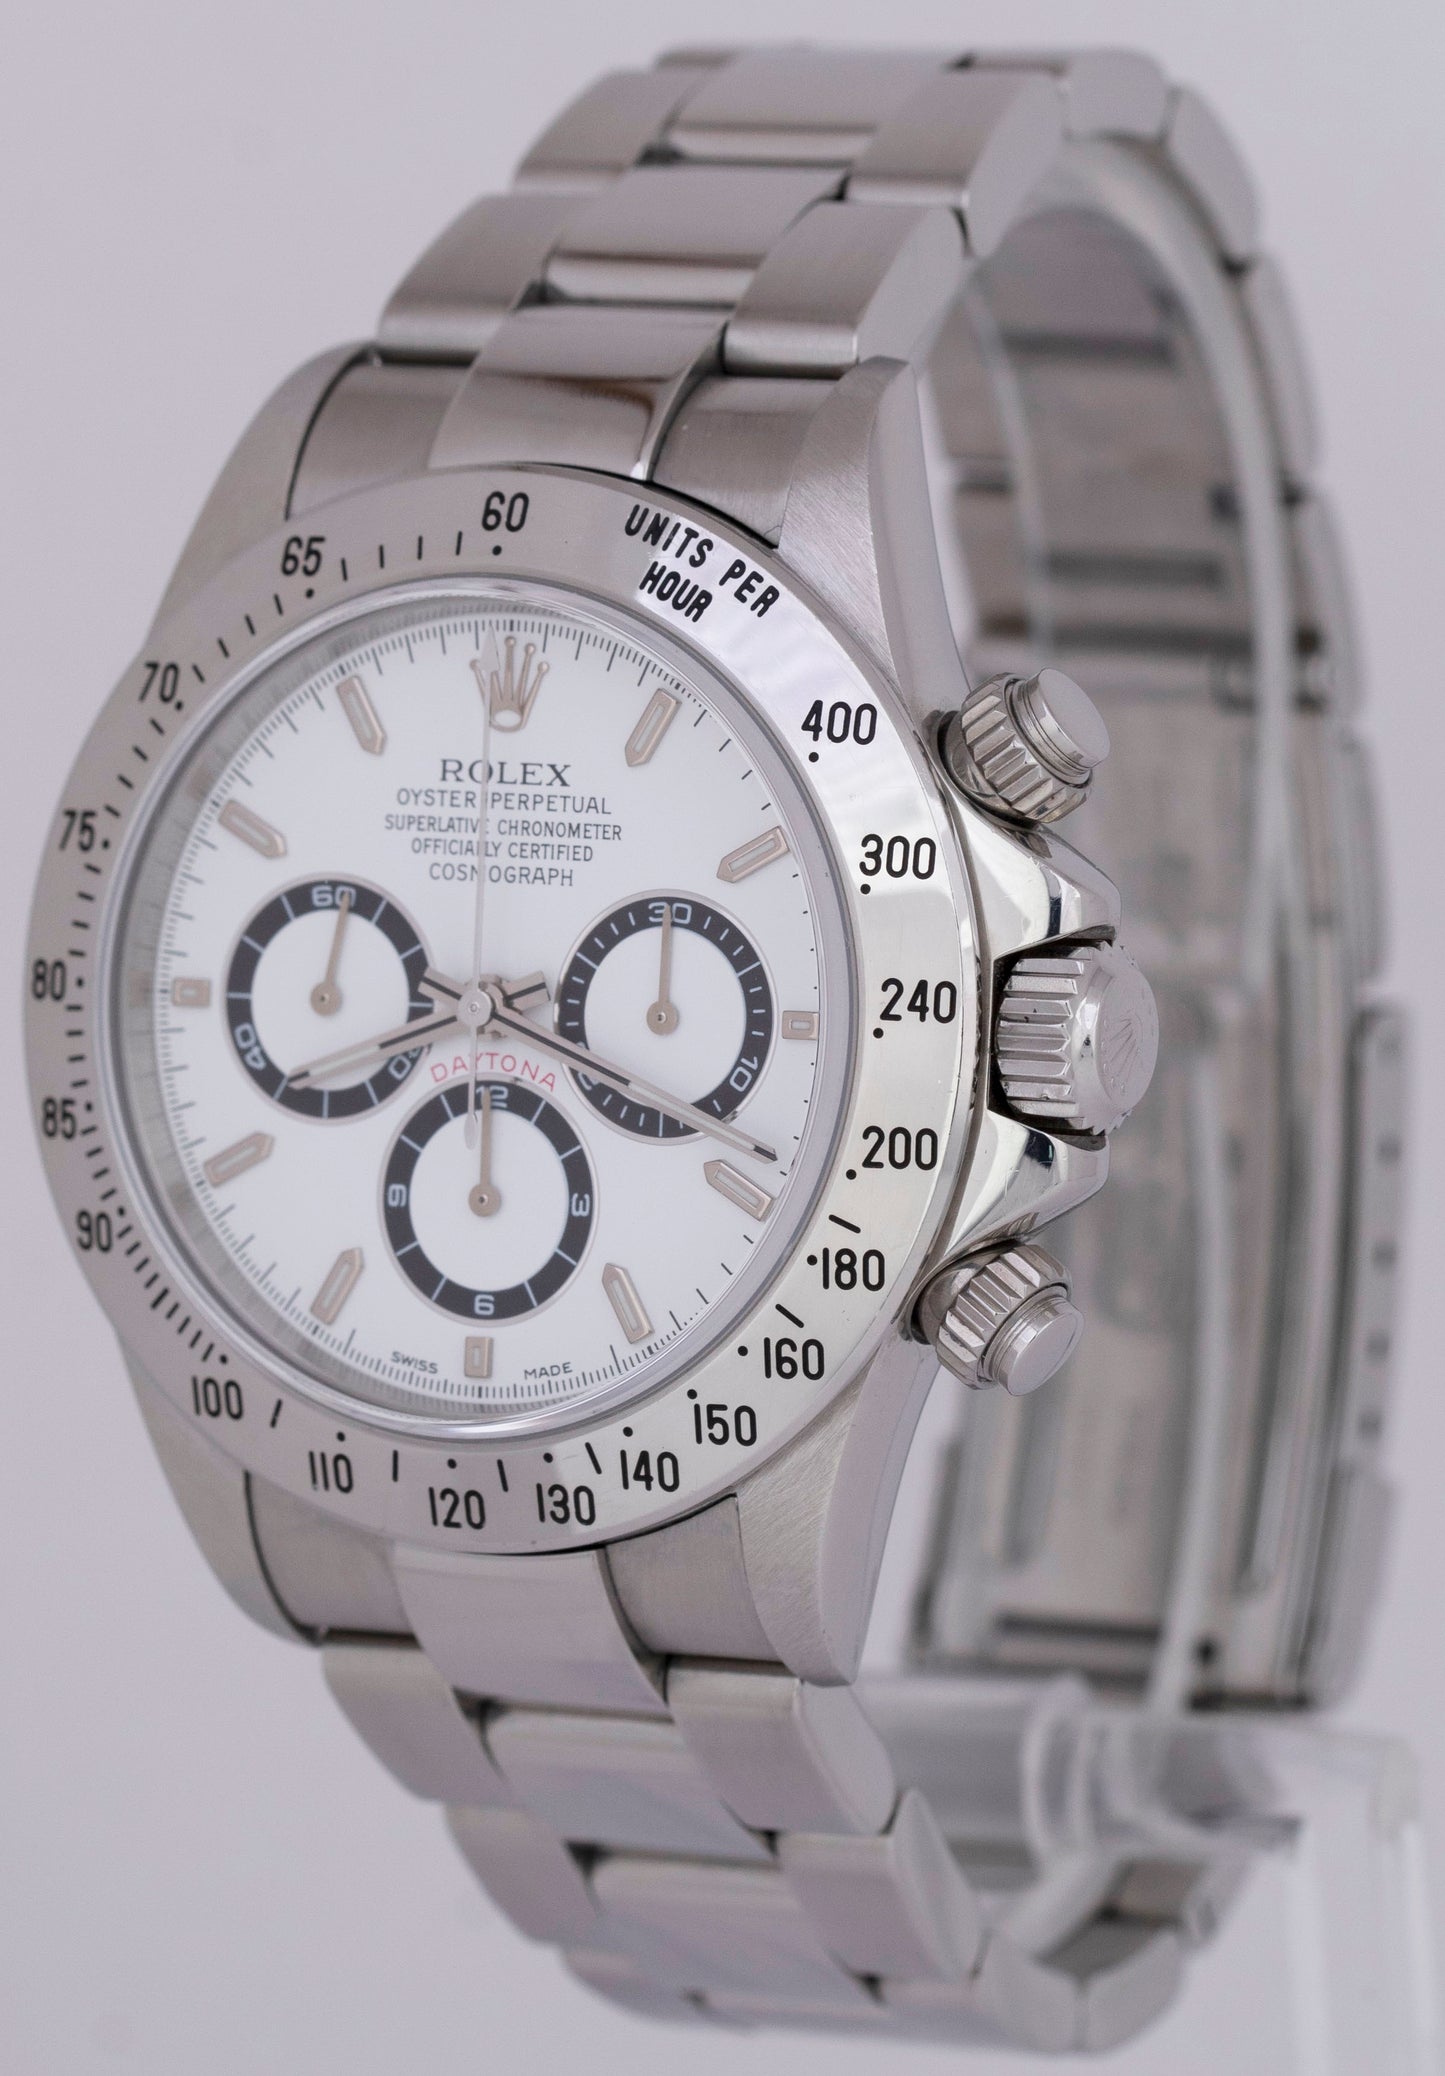 UNPOLISHED PAPERS Rolex Daytona Cosmograph SEL White Steel 40mm Watch 16520 B+P